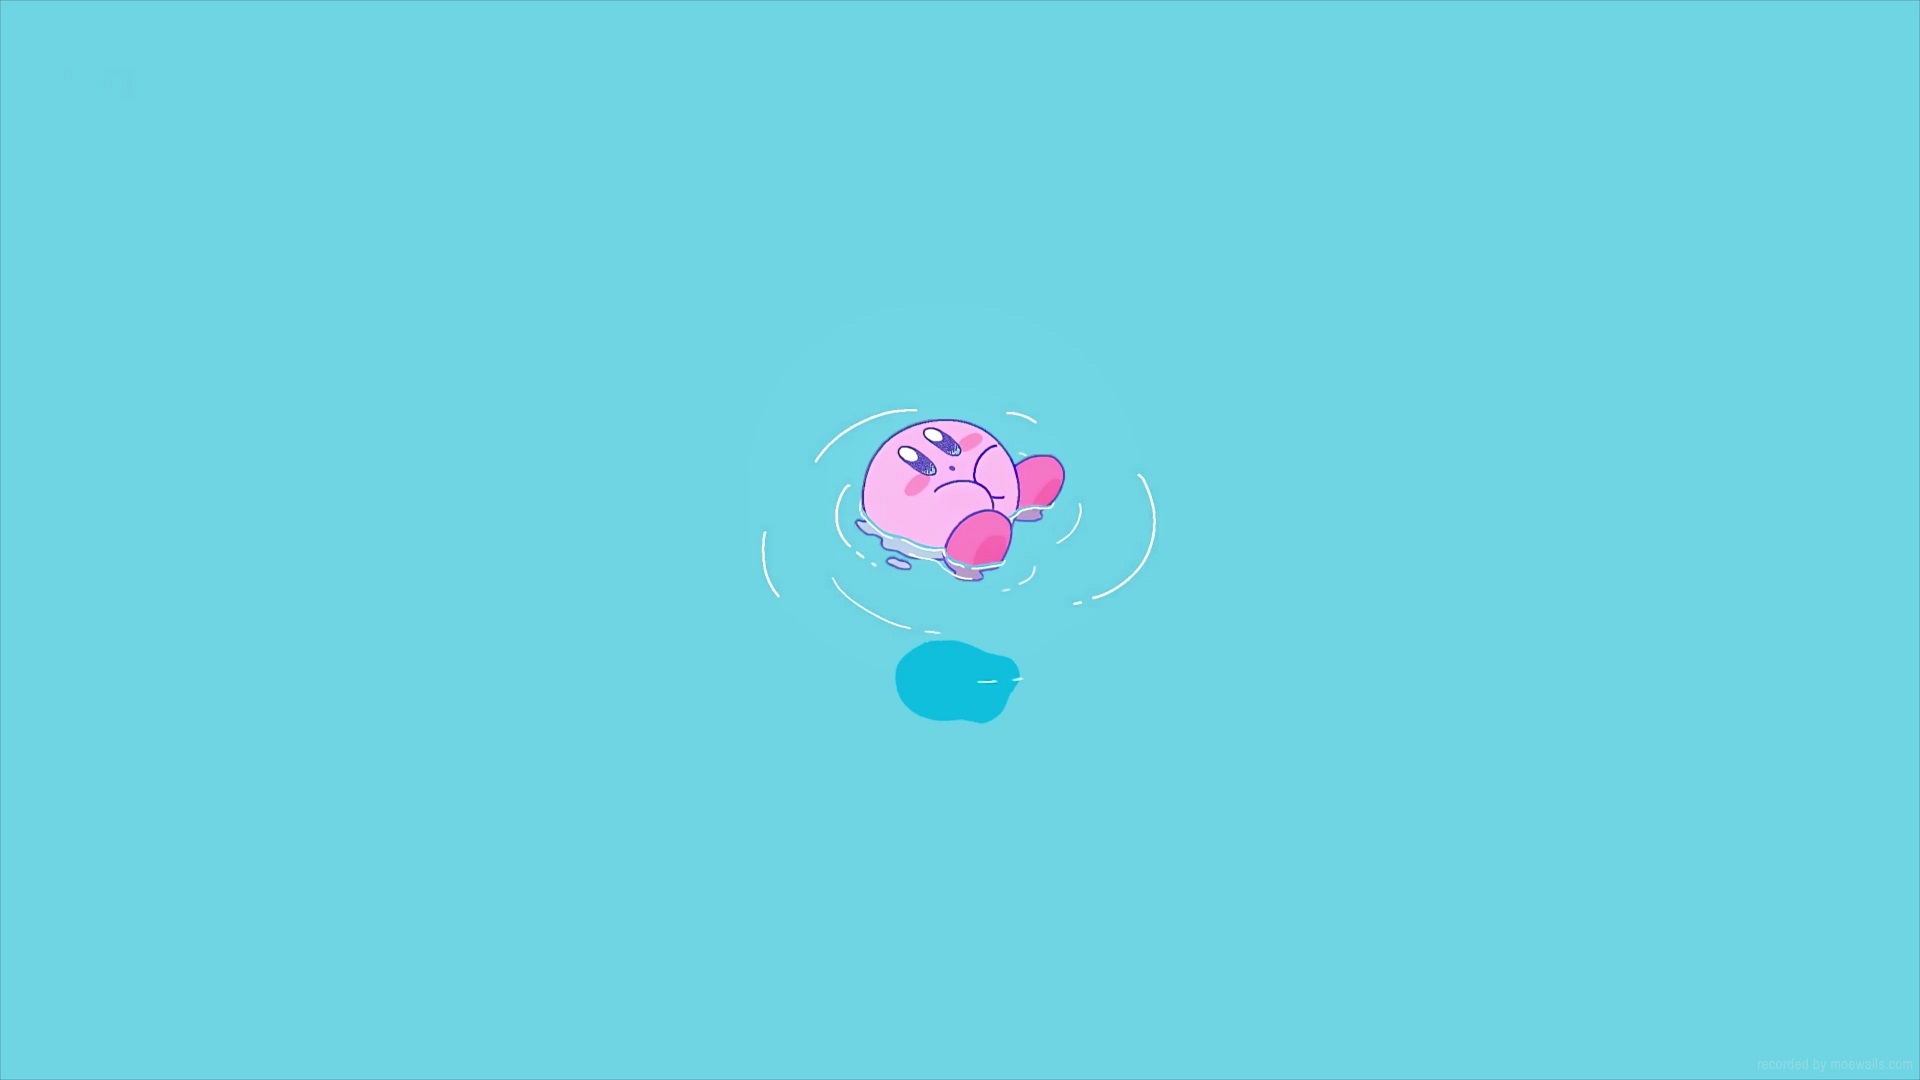 A GLITCH IN THE GAME I LOOP LIKE A BUG  today nintendo posted a new  wallpaper for kirbys